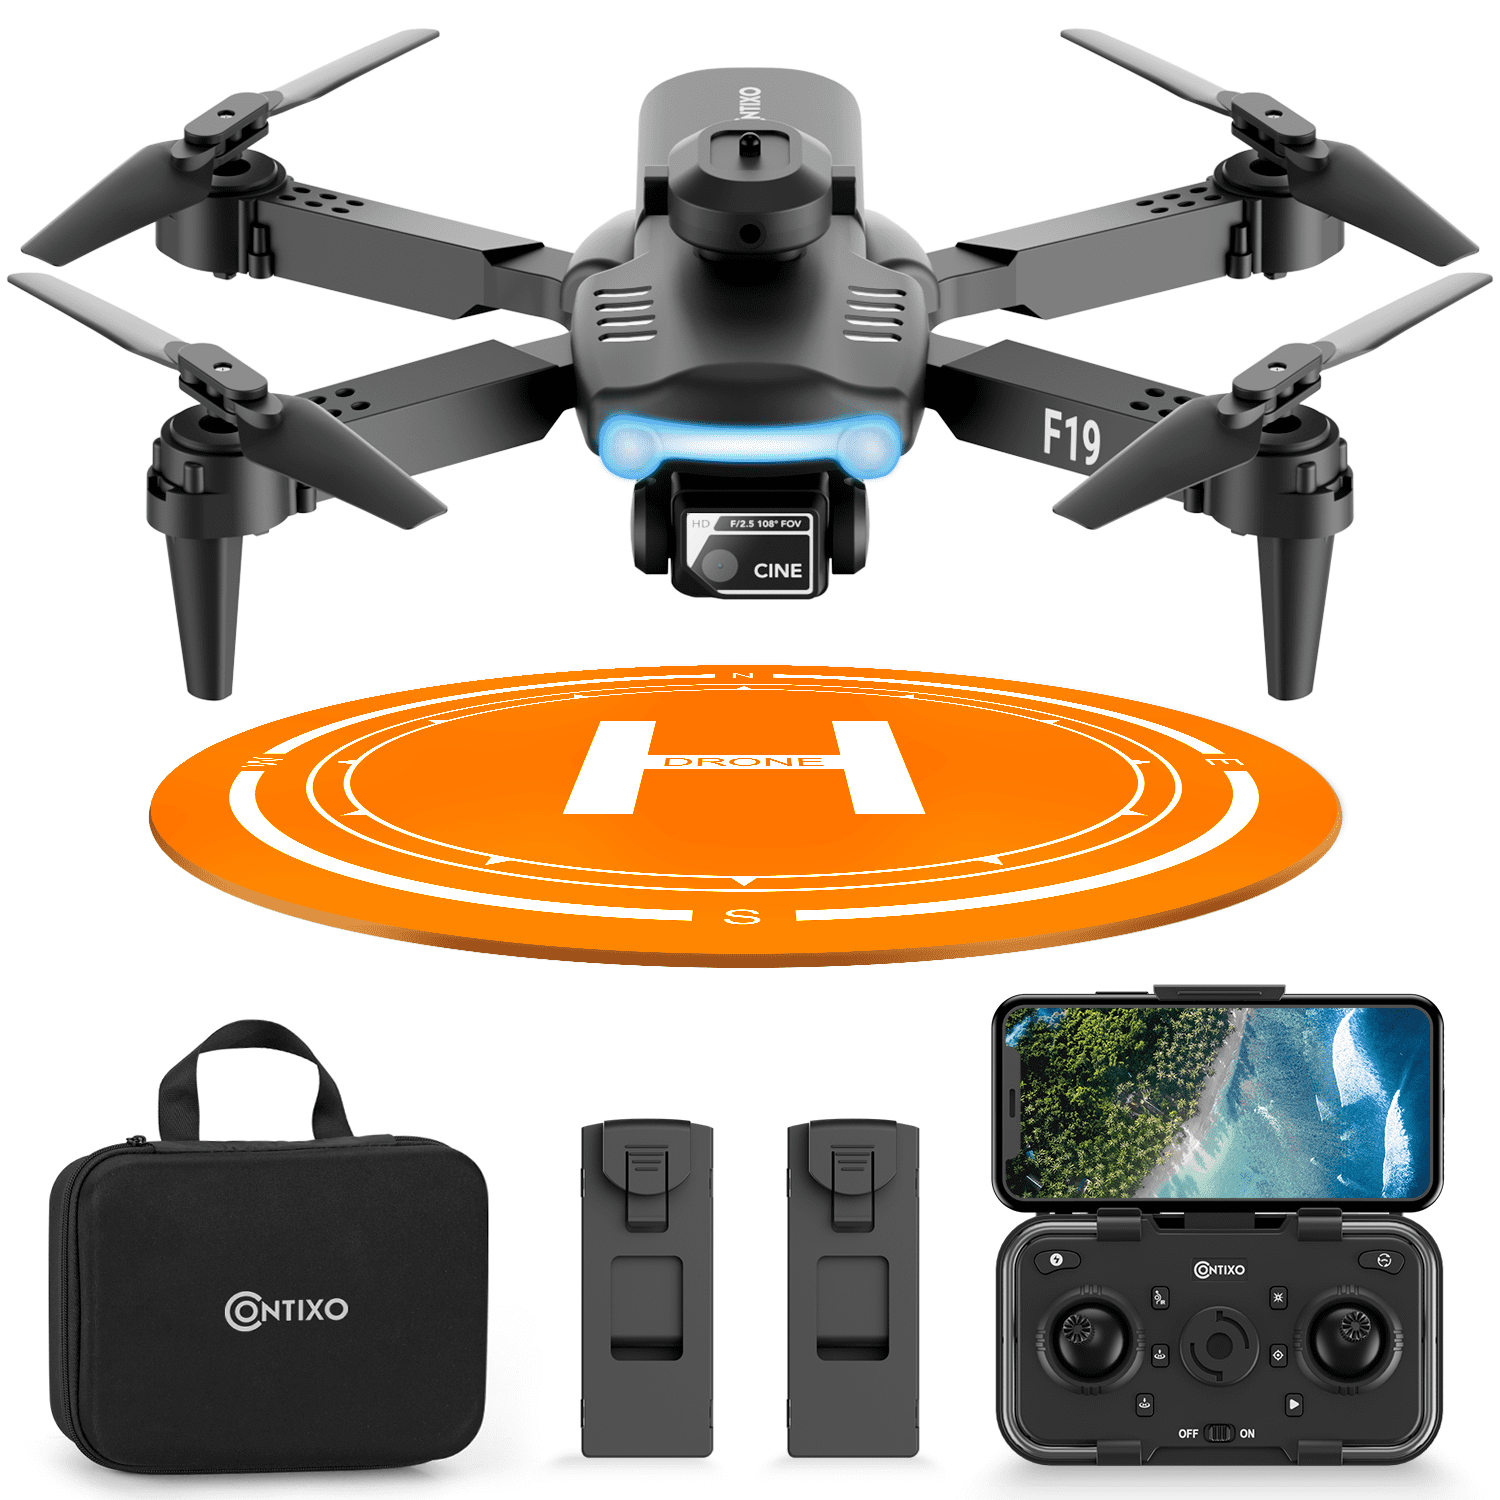 Contixo F19 Drone with 1080P Camera & Obstacle Avoidance